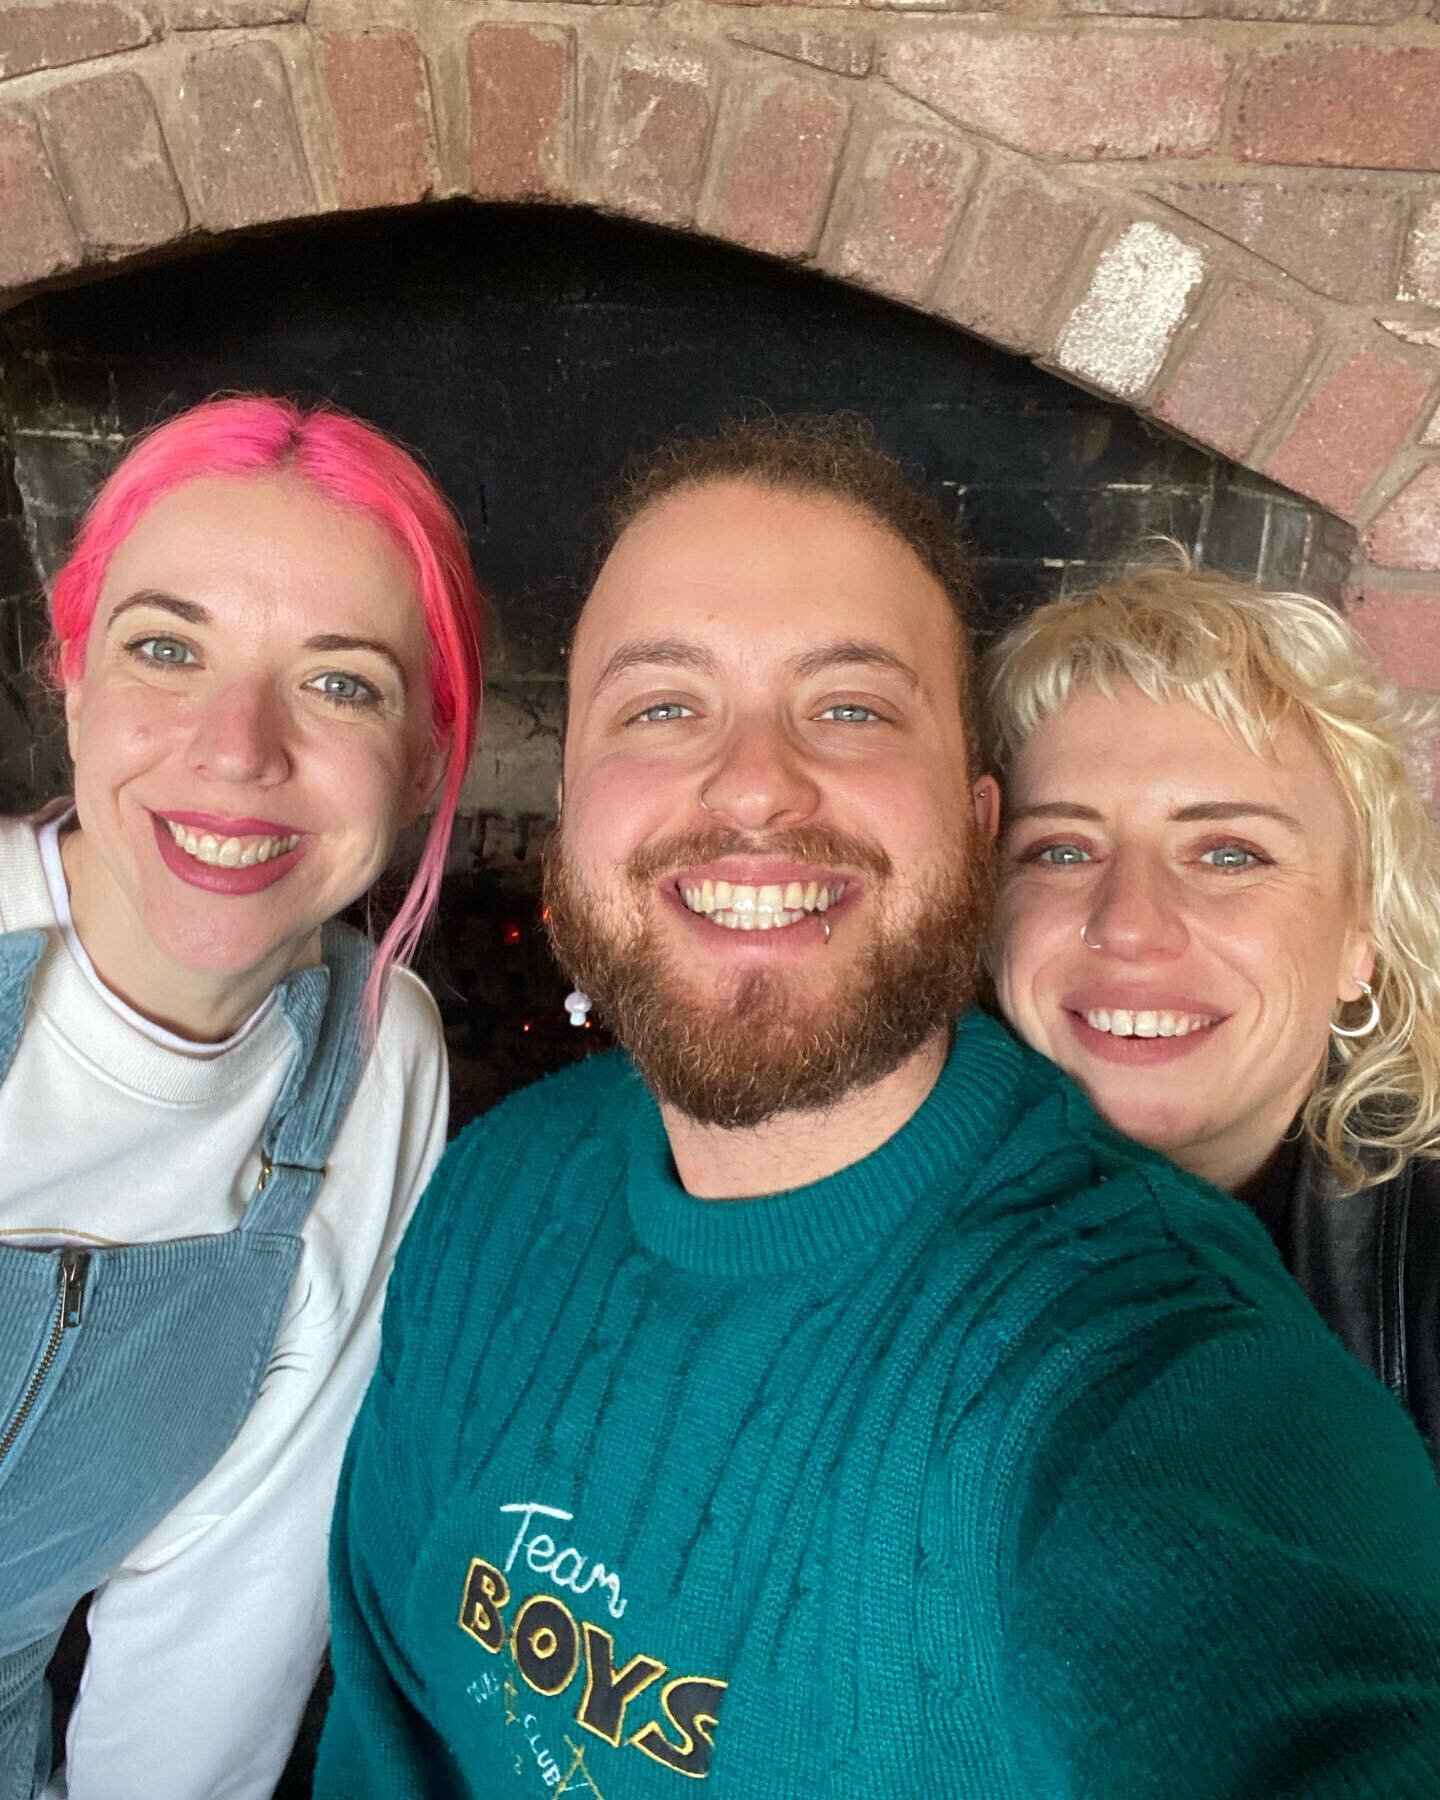 Just 3 cutie queer celebrants who got together to do our professional development (or attempted to through website nightmares) so we can keep marrying you! 

There&rsquo;s so much &lsquo;competition&rsquo; in many industries and one thing I love most